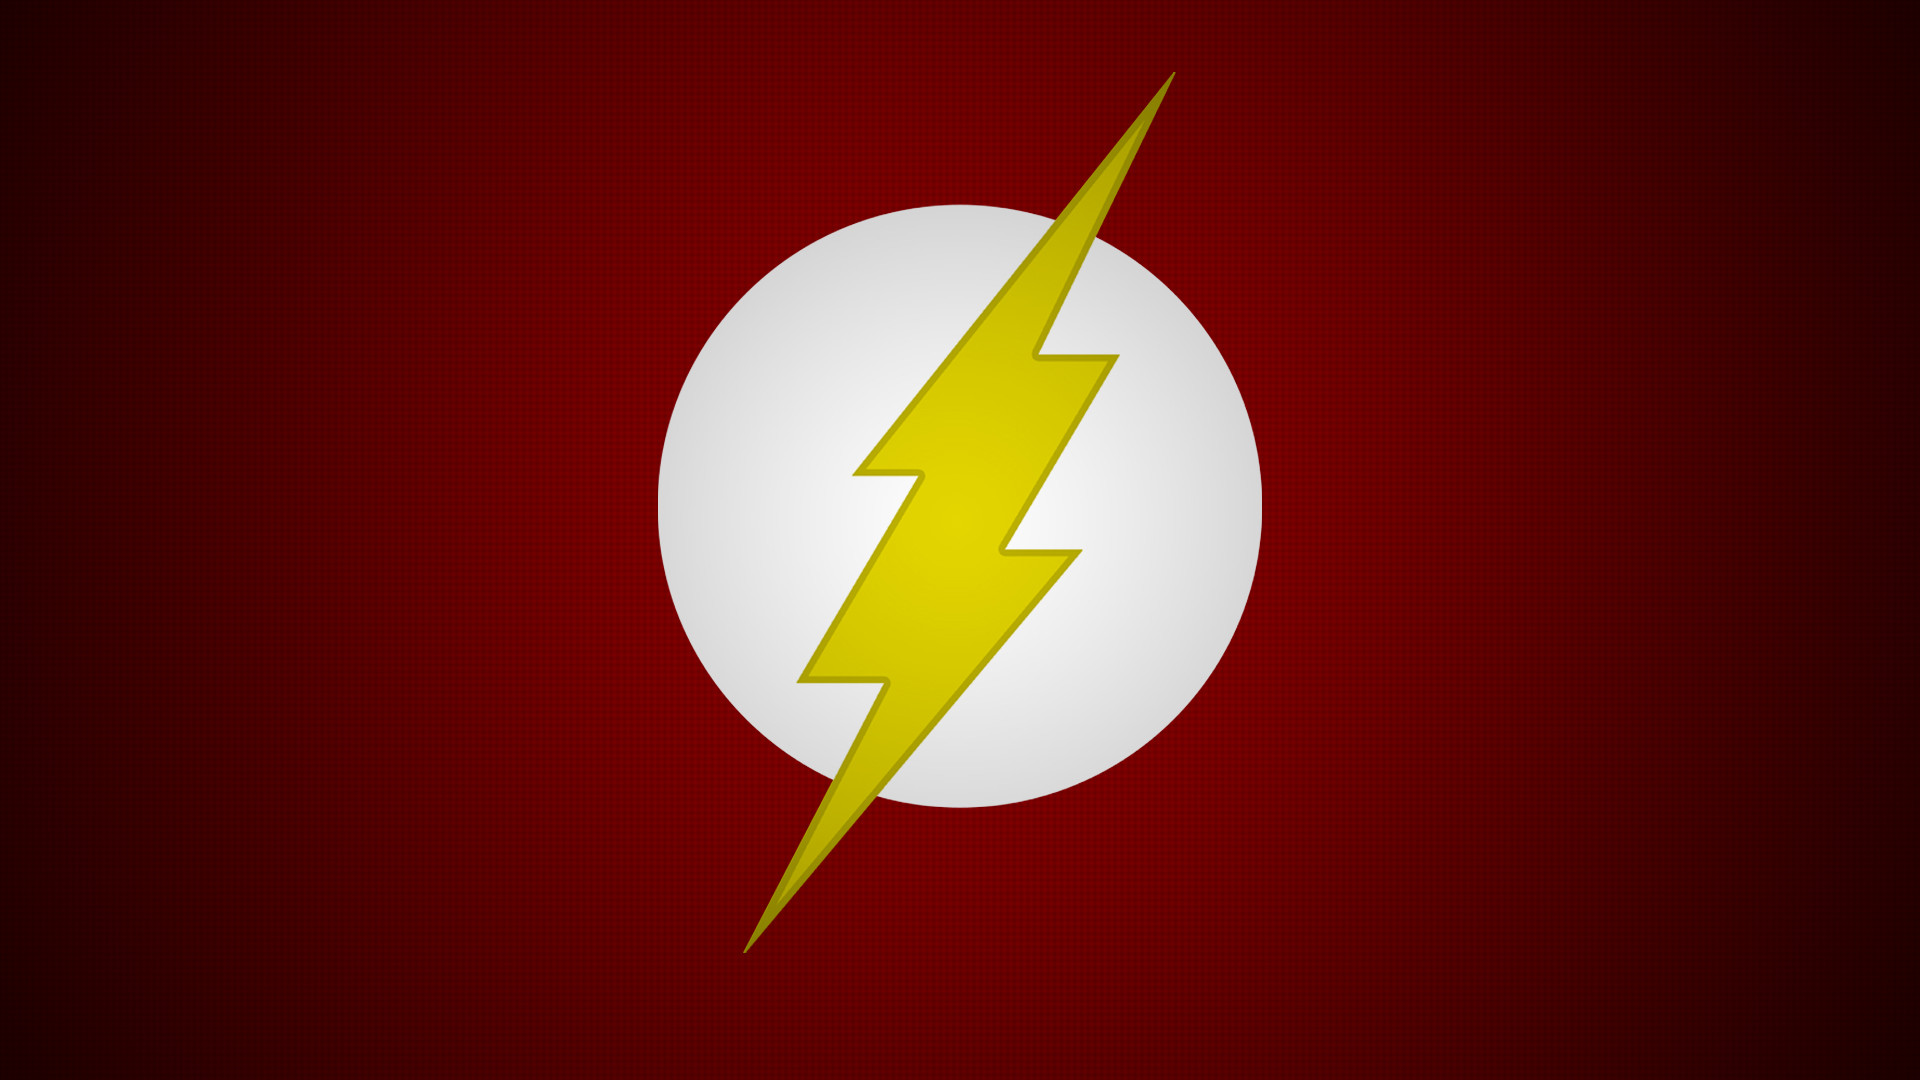 1920x1080 The Flash Wallpaper  by masteroffunny The Flash Wallpaper   by masteroffunny